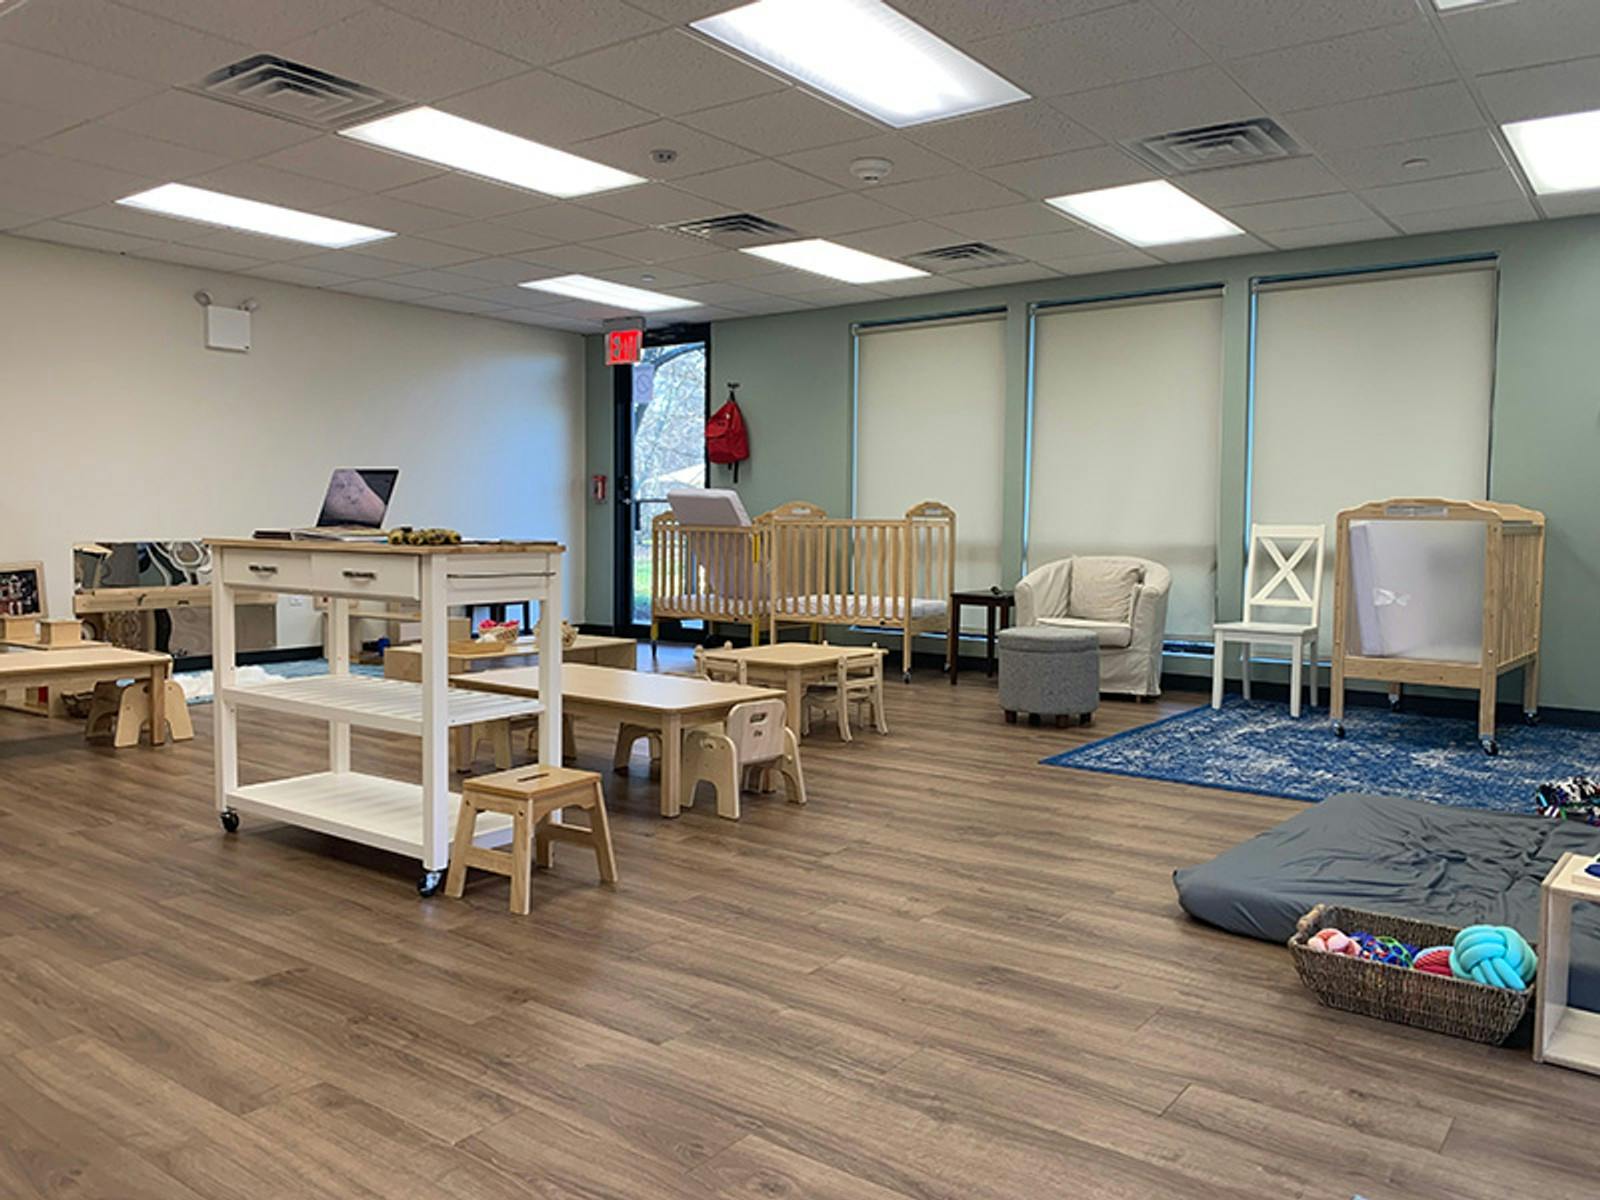 Our space for infants and toddlers.